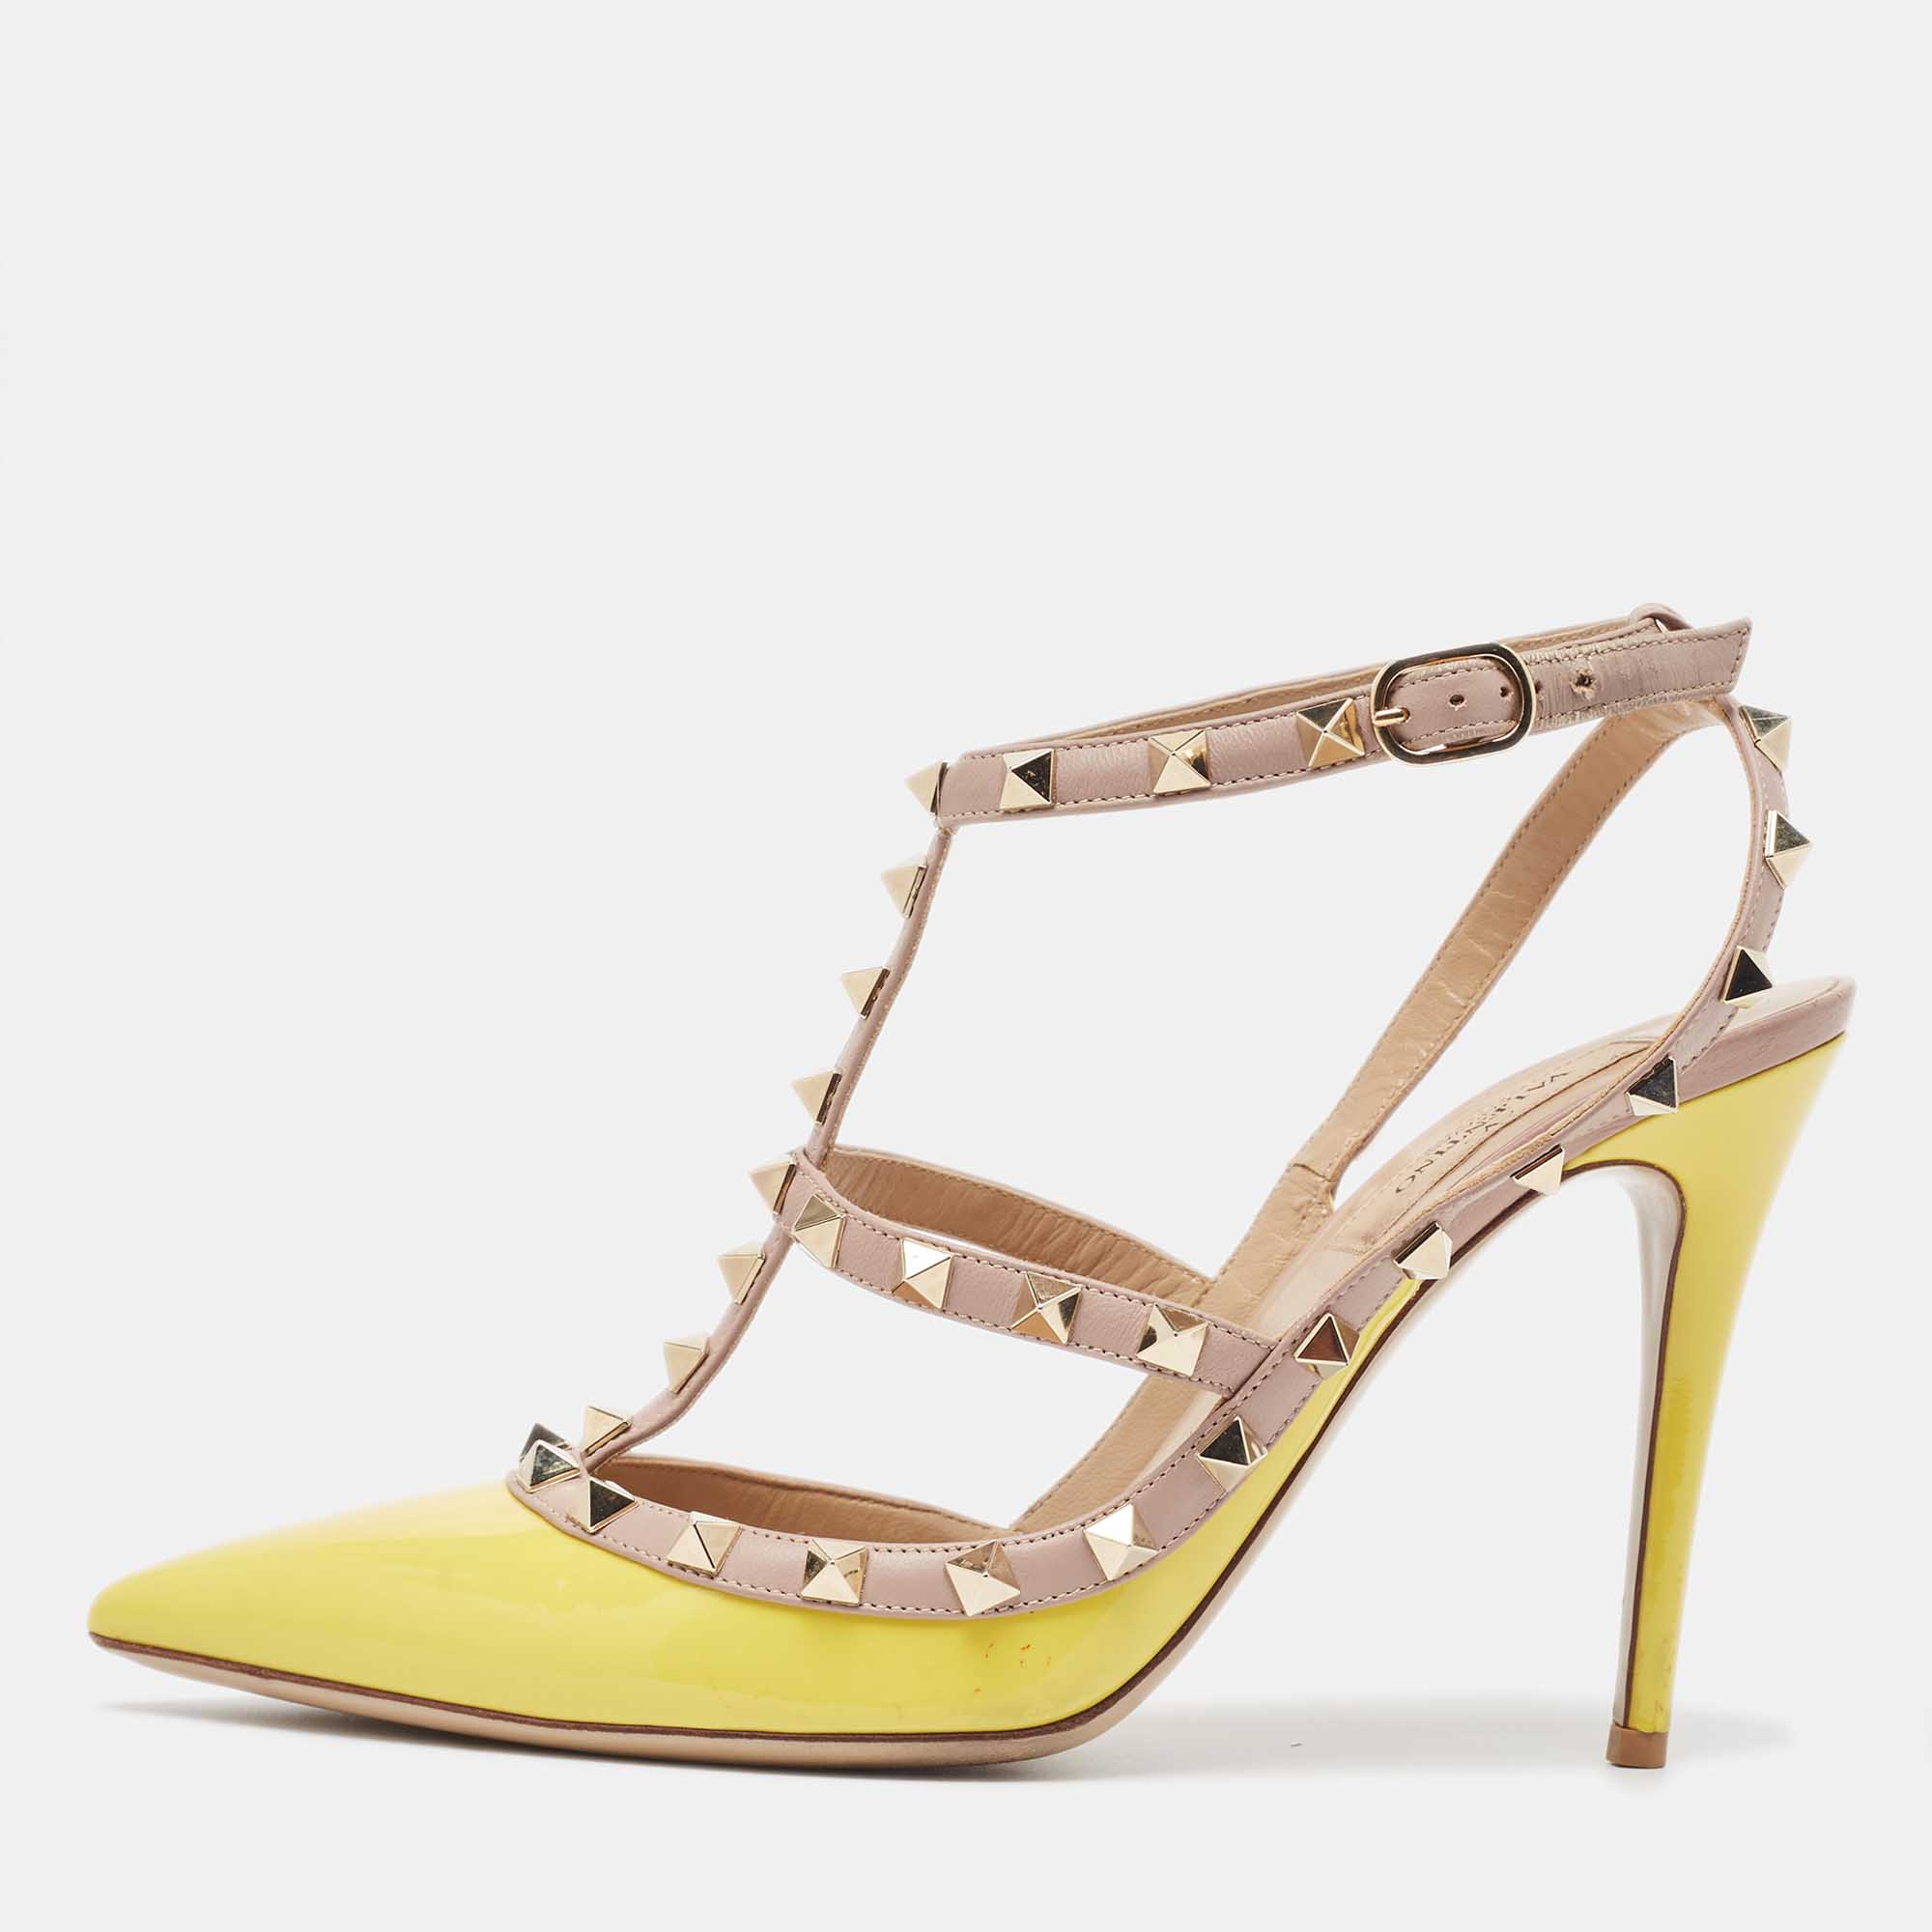 Discover footwear elegance with these Valentino womens pumps. Meticulously designed these heels marry fashion and comfort ensuring you shine in every setting.